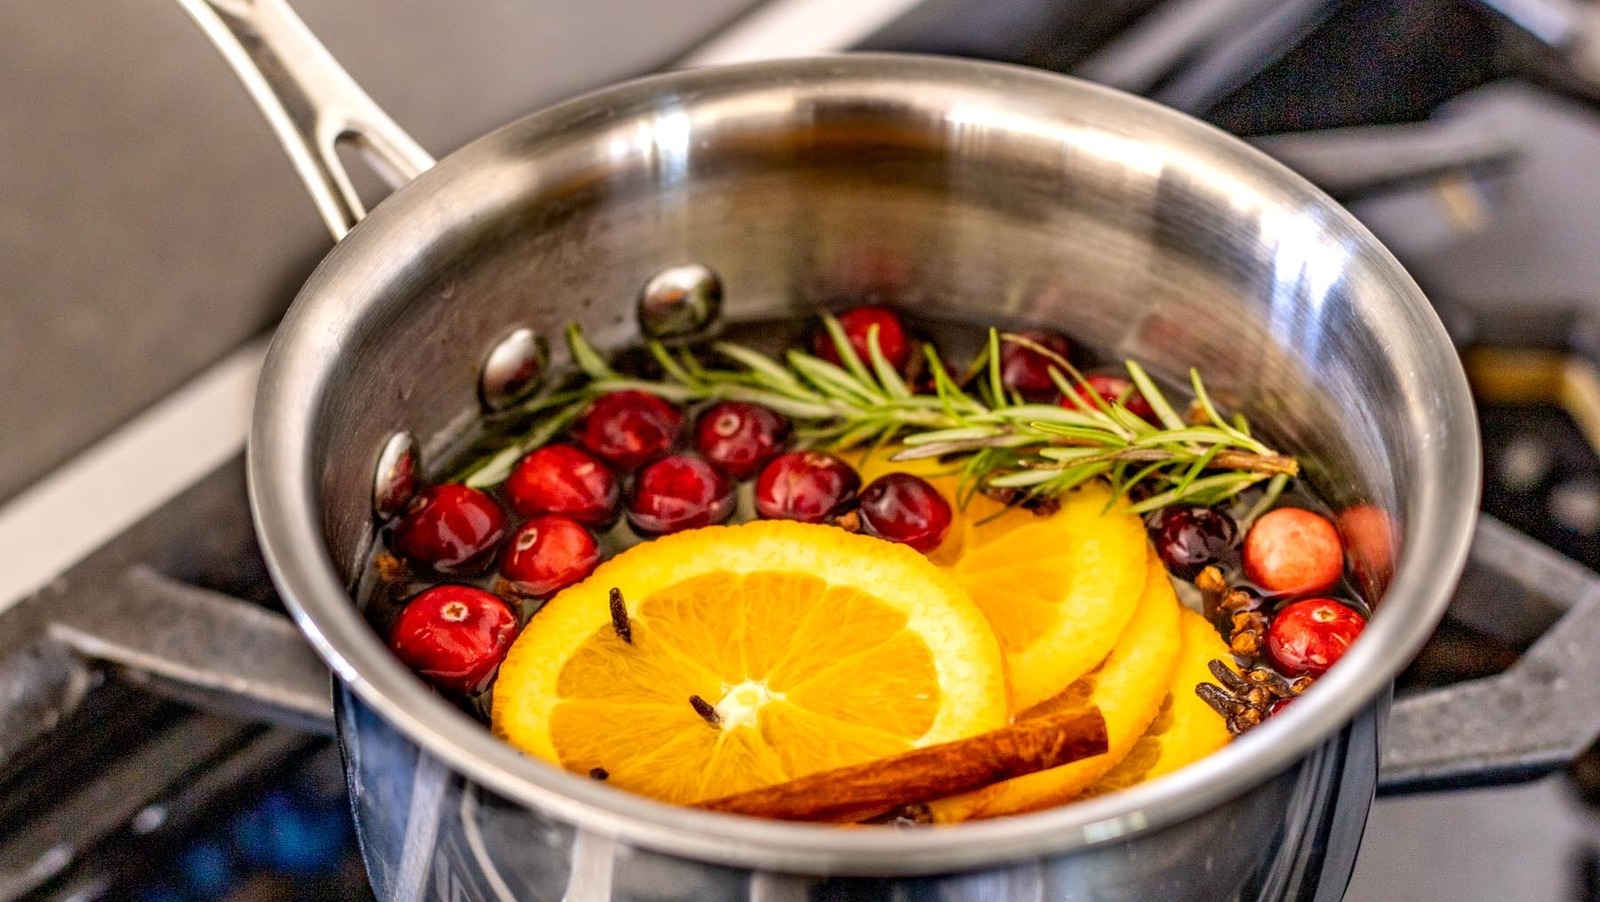 6 Simmer Pot Recipes to Make Your Home Smell Great